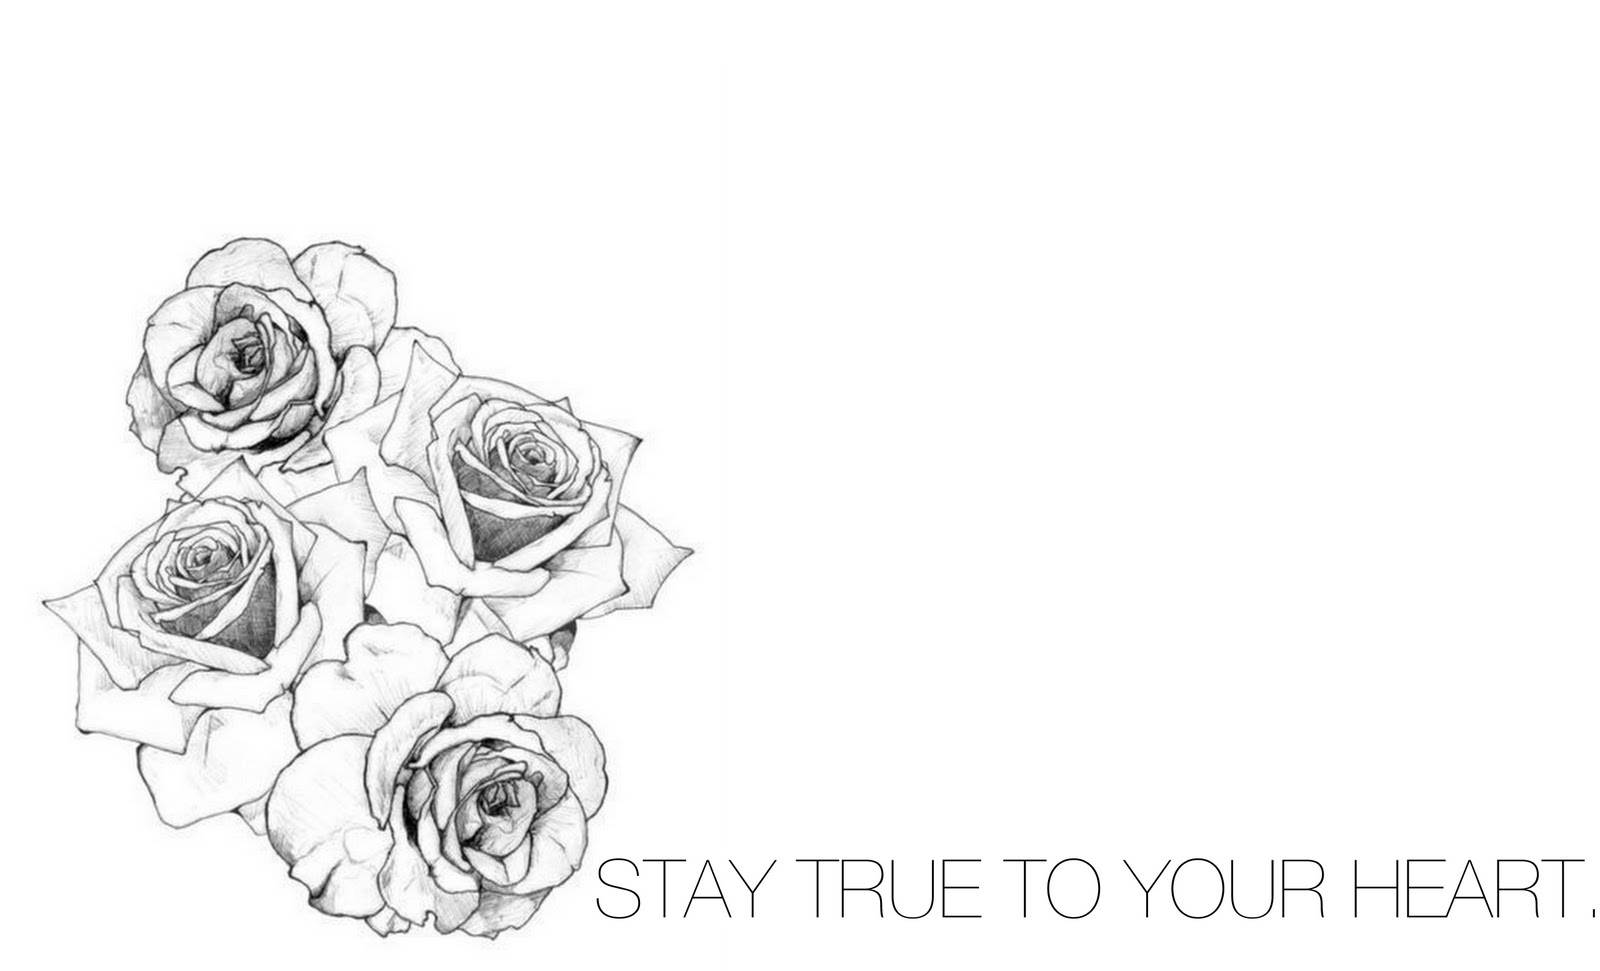 stay true to your heart.